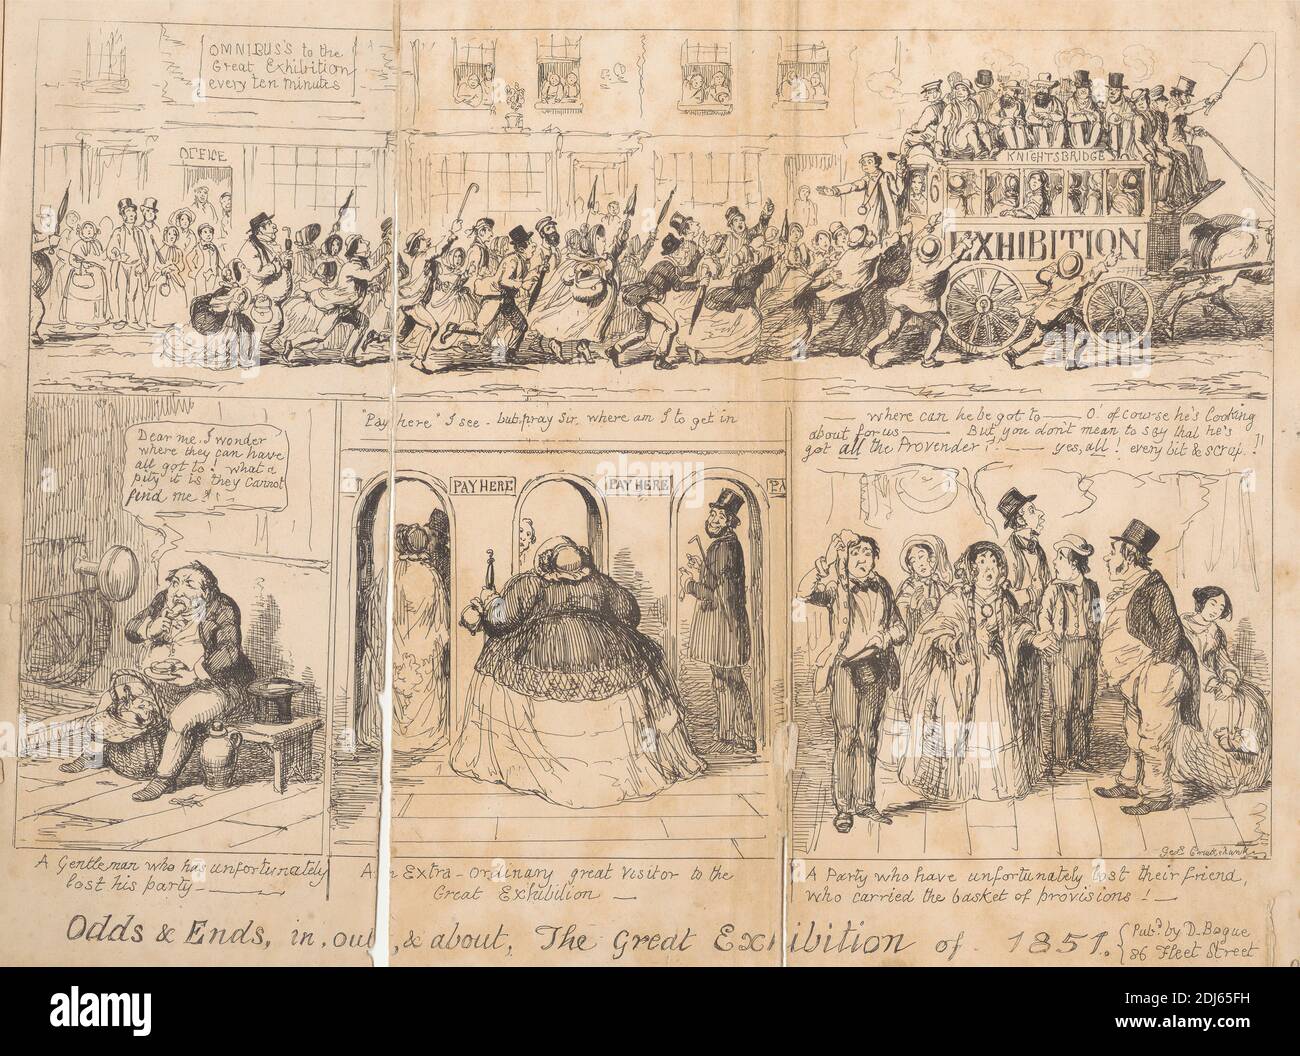 Odds & Ends, in, out, and about, The Great Exhibition of 1851, Print made by George Cruikshank, 1792–1878, British, 1851, Etching on medium, slightly textured, cream wove paper Stock Photo